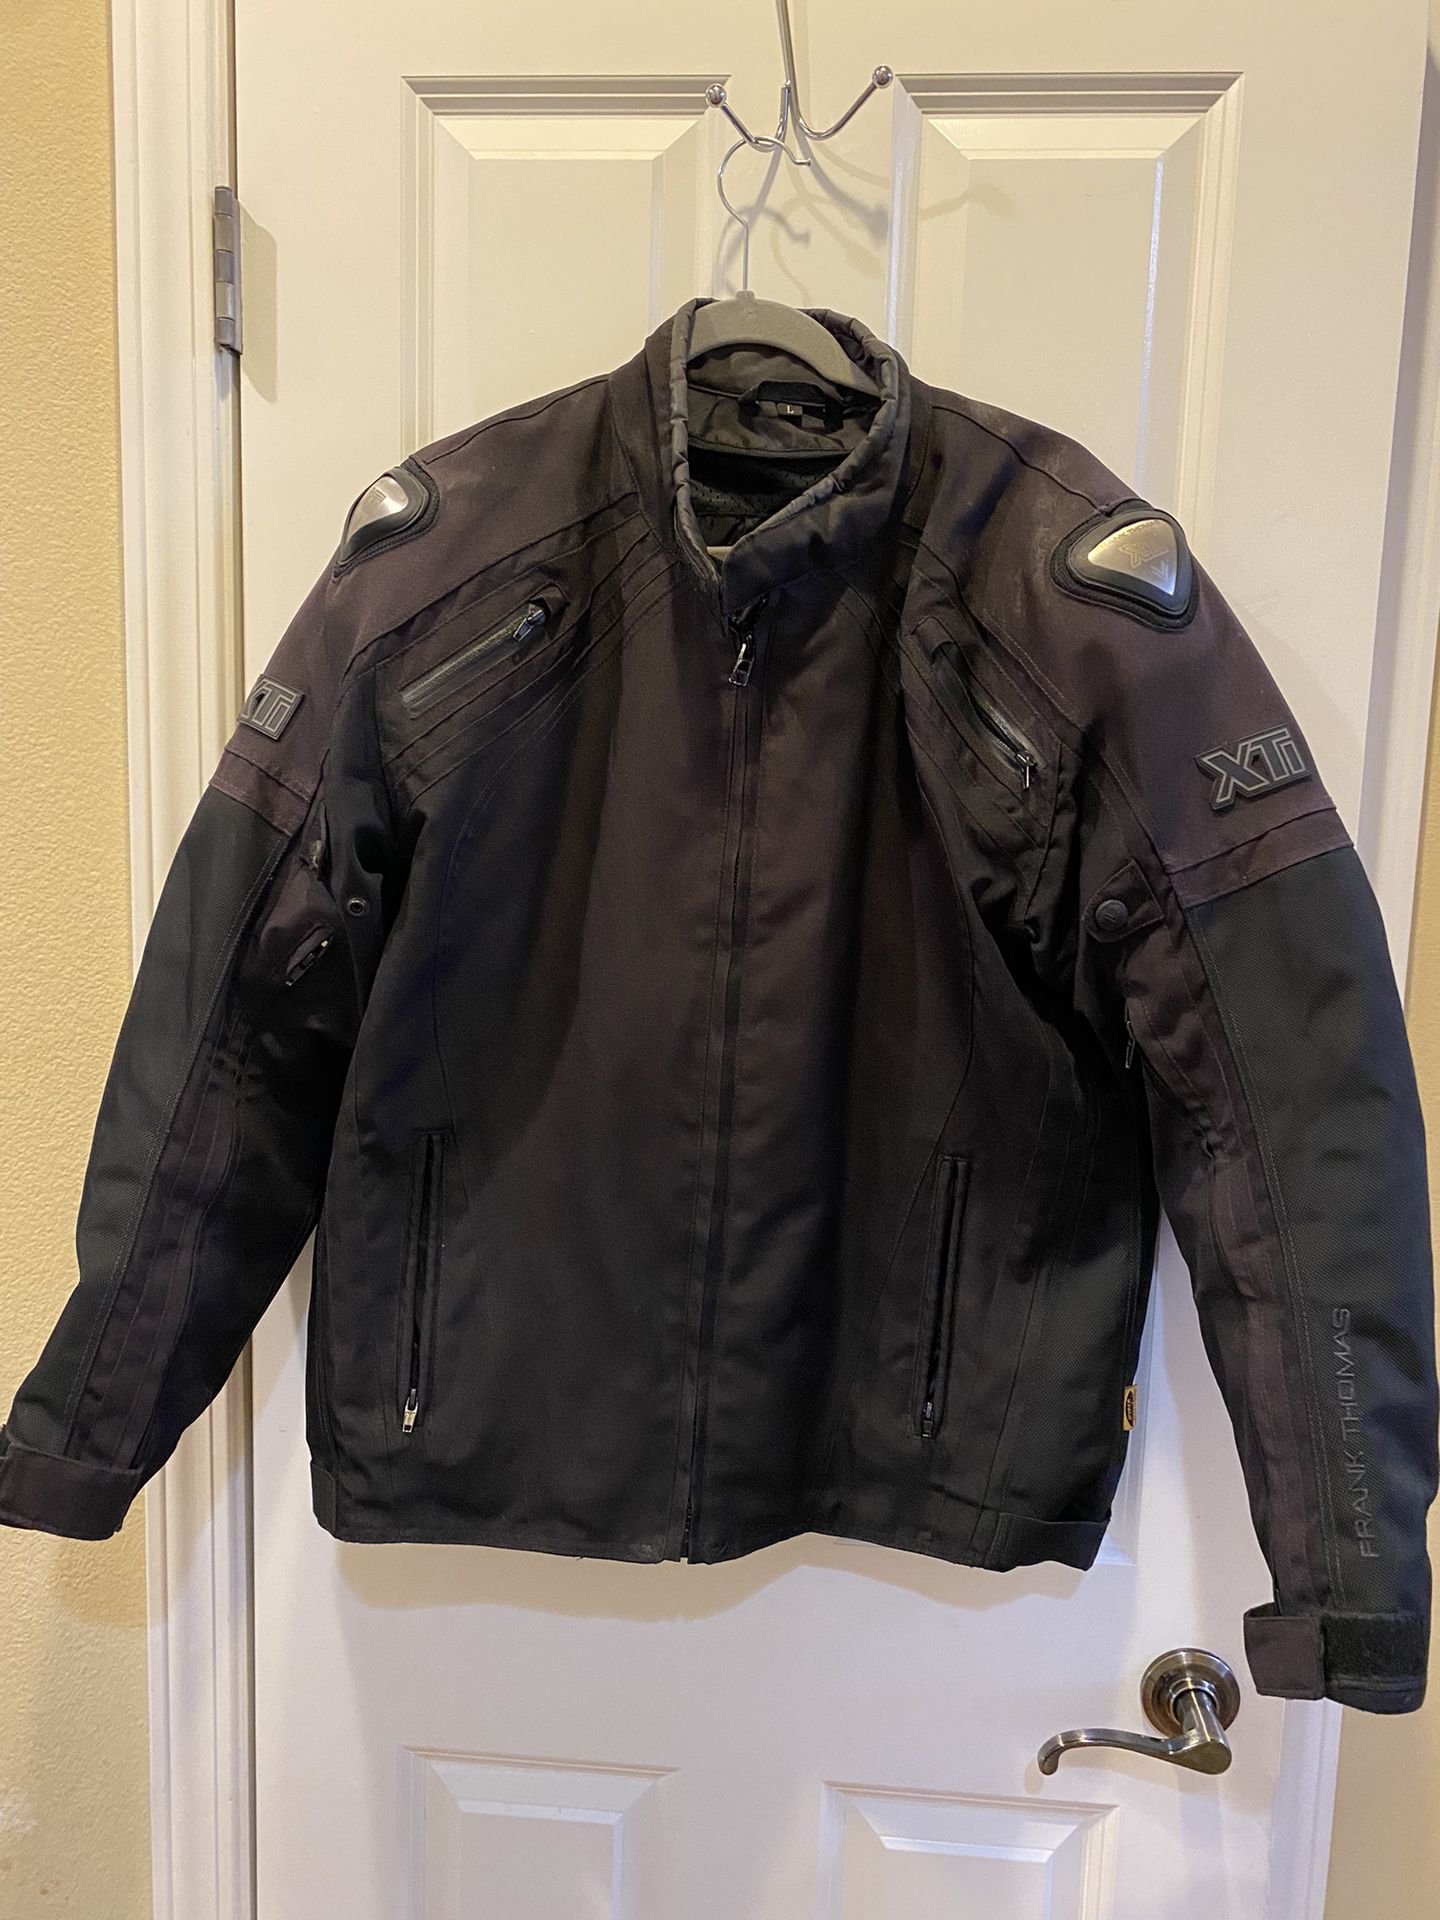 Frank Thomas great Condition - Xti Hyper-tech Motorcycling Gear Black  Jacket Size large for Sale in San Ramon, CA - OfferUp